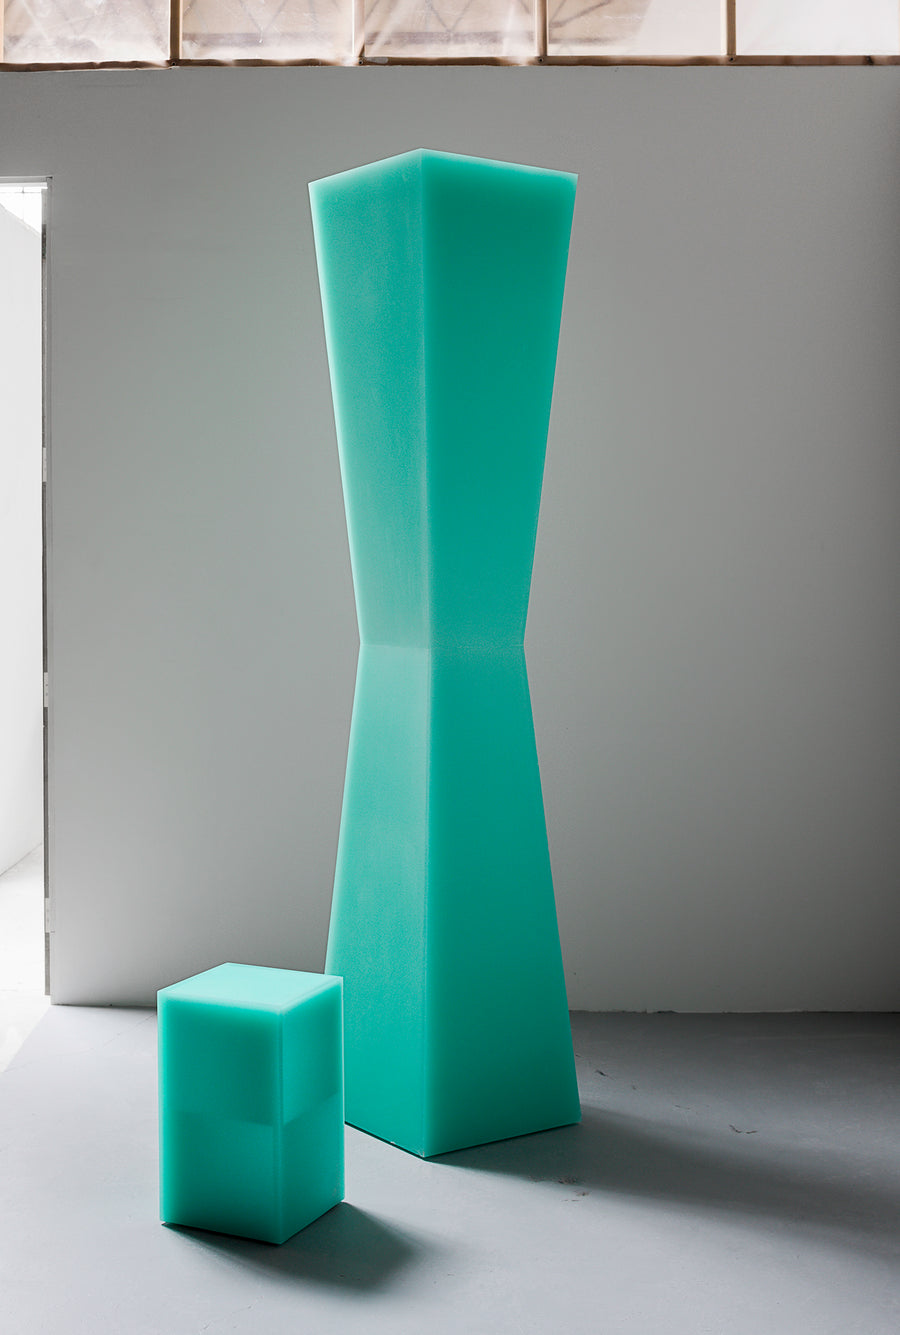 Column as sculpture. A statement collectible design piece by Facture Studio. Represented by Tuleste Factory in New York City.